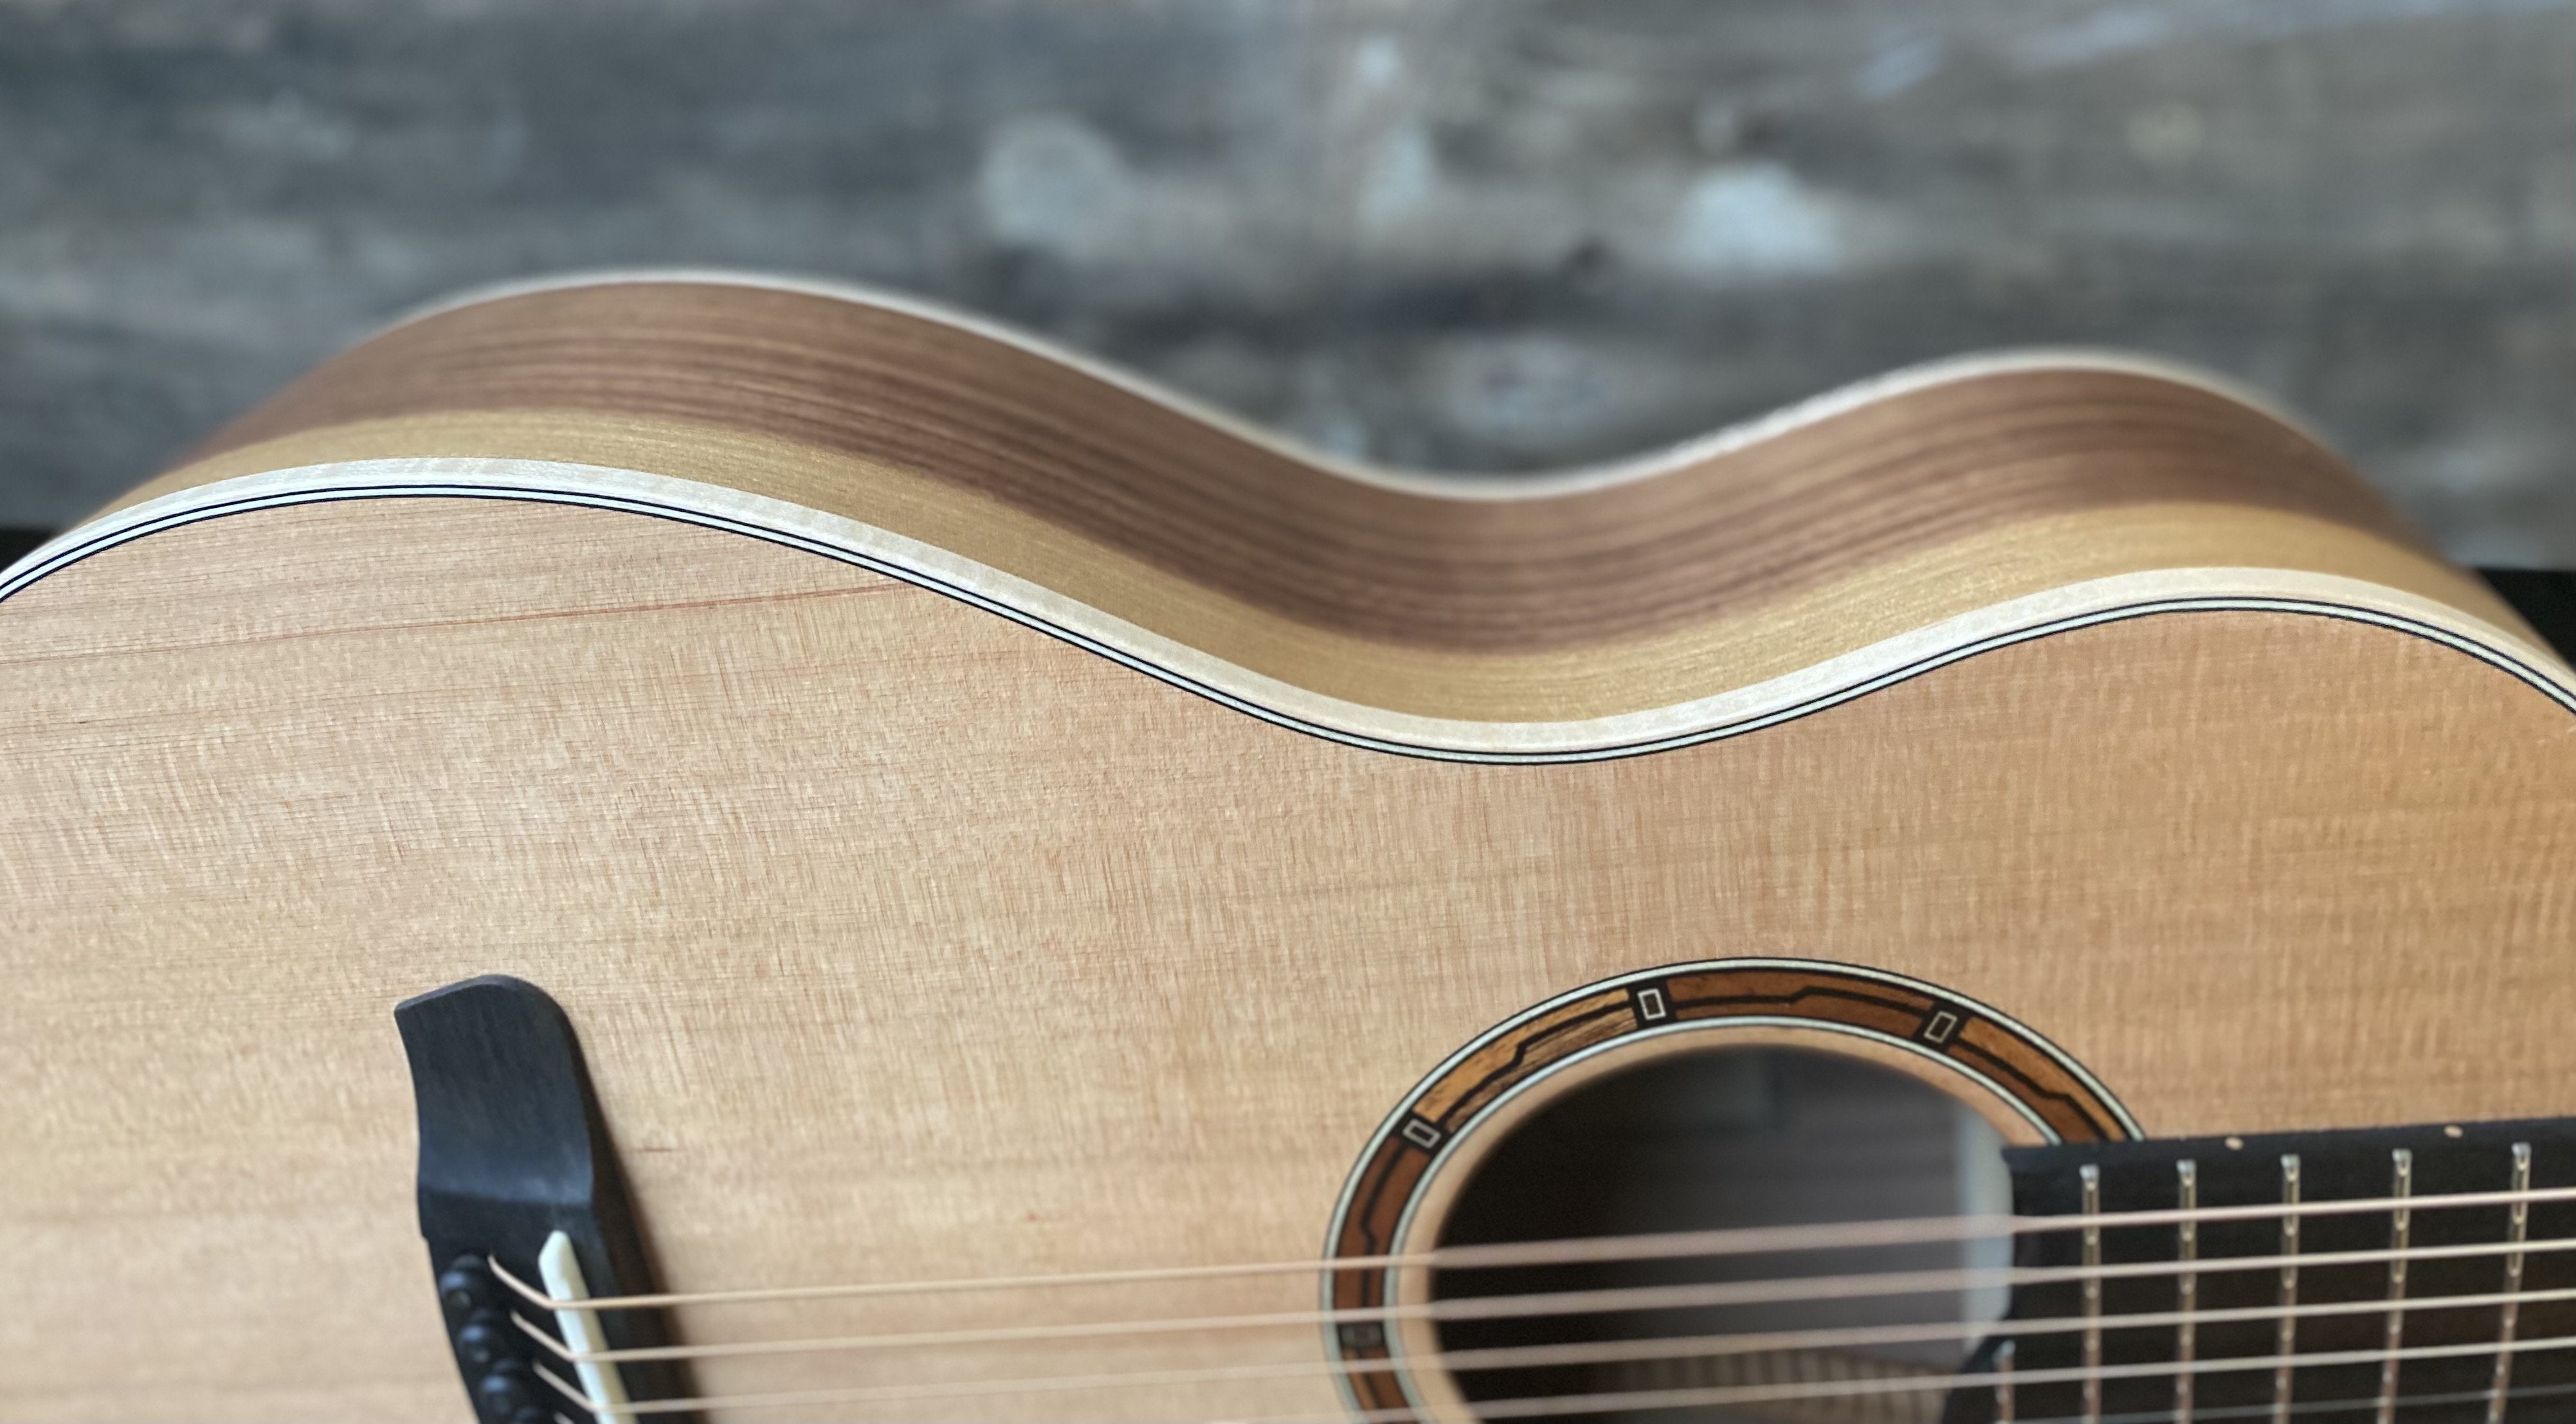 Dowina Walnut BV, Acoustic Guitar for sale at Richards Guitars.